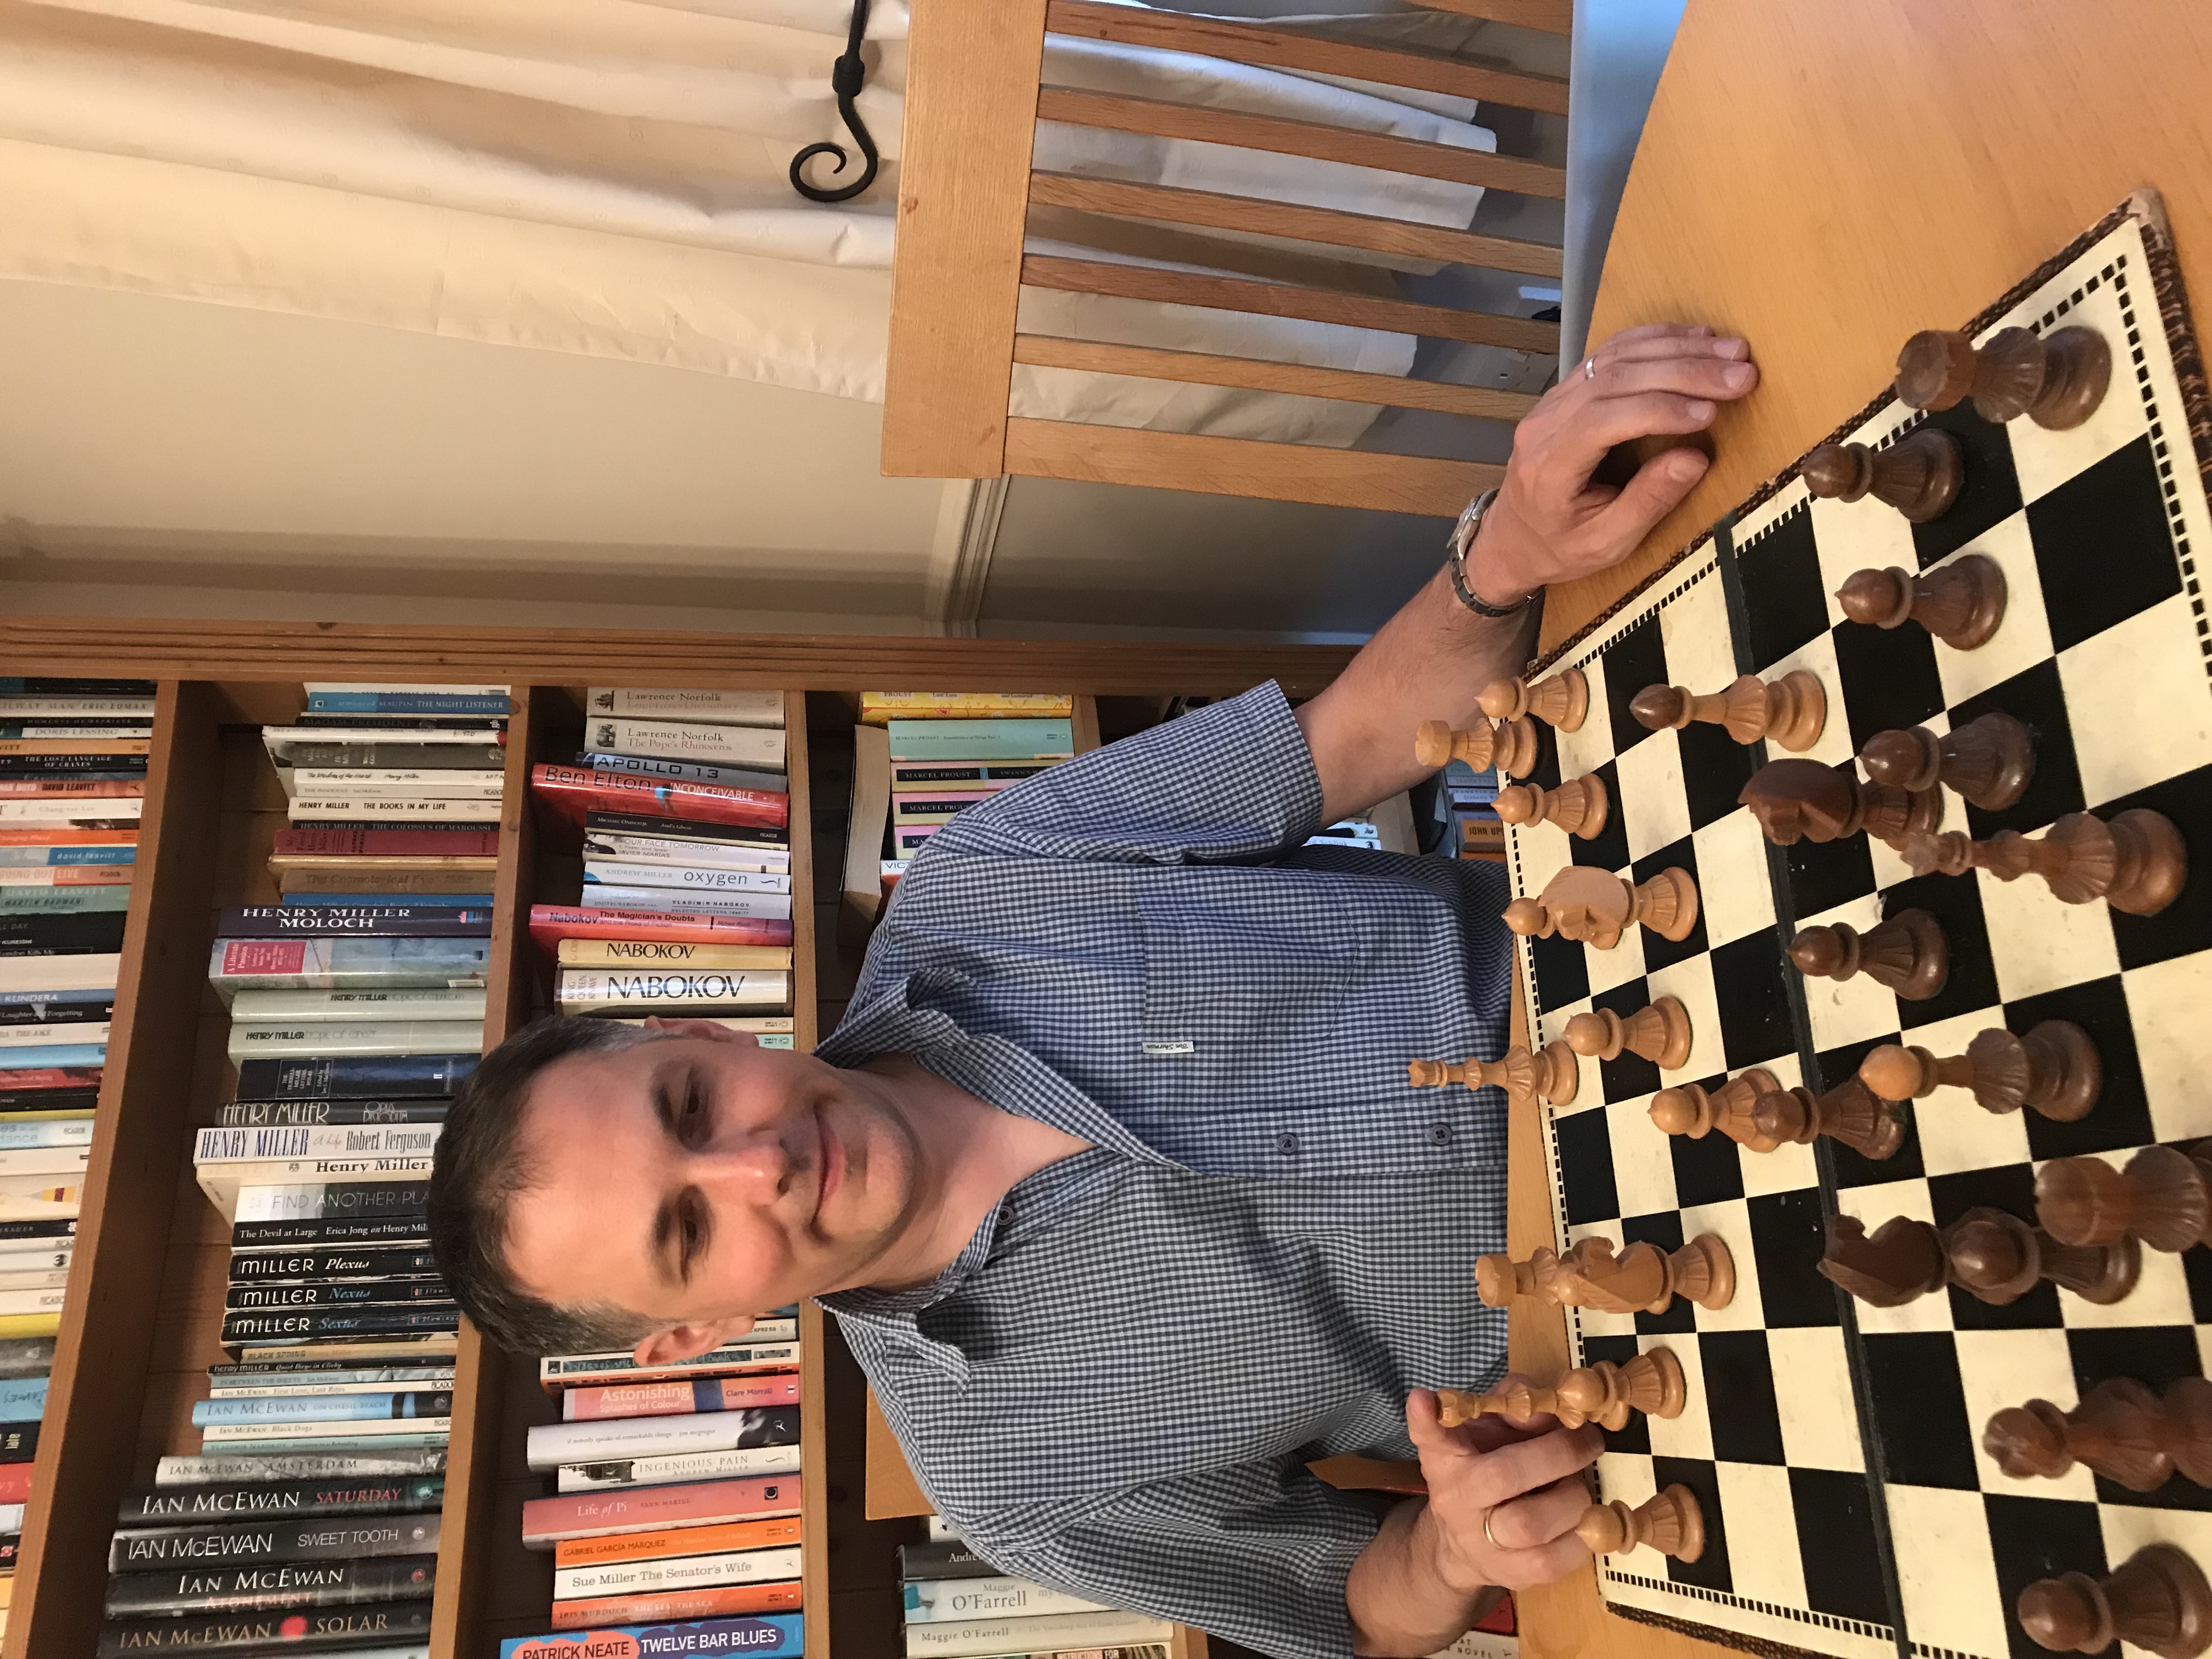 Chess Book Reviews  Reviewing chess books for the non-GMs! 2018 CJA Best  Column Award winner!